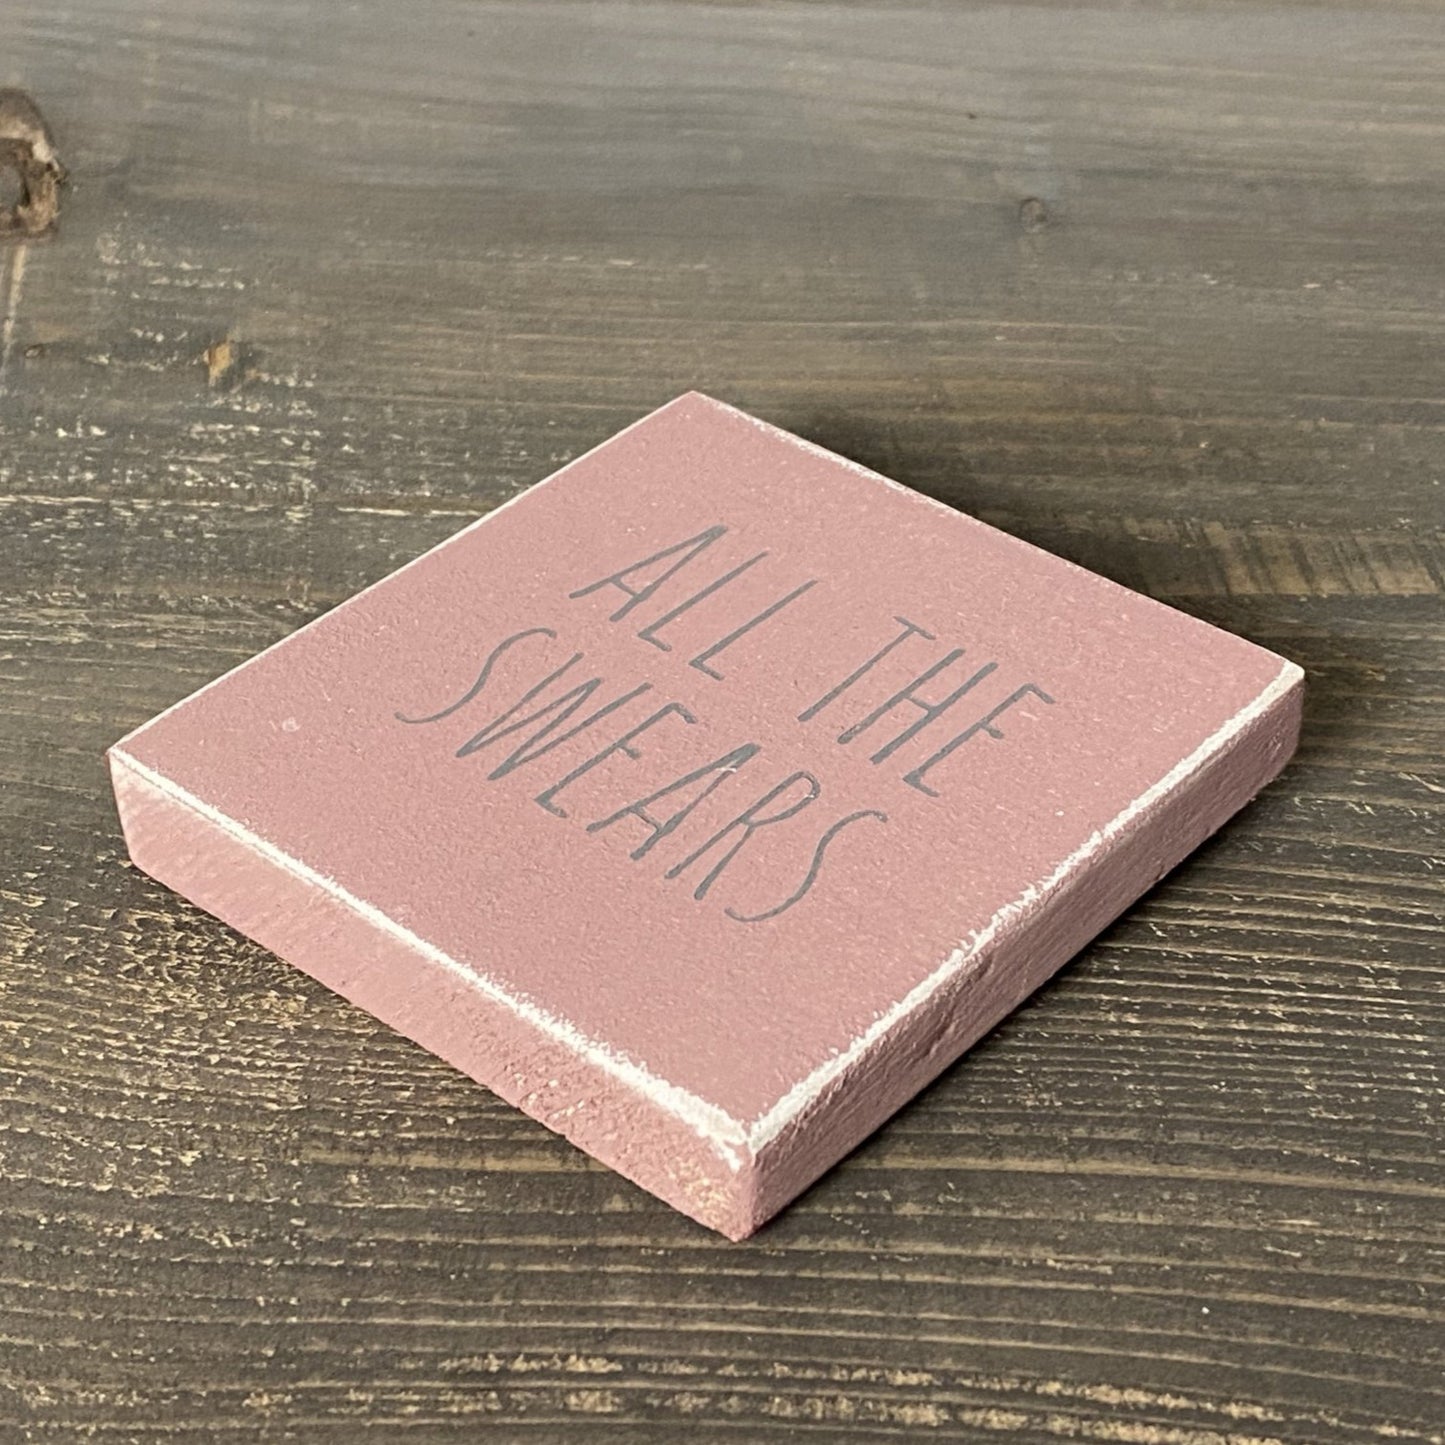 Reclaimed Wood Mini Sign | All the swears - The Imperfect Wood Company - Mini wood sign